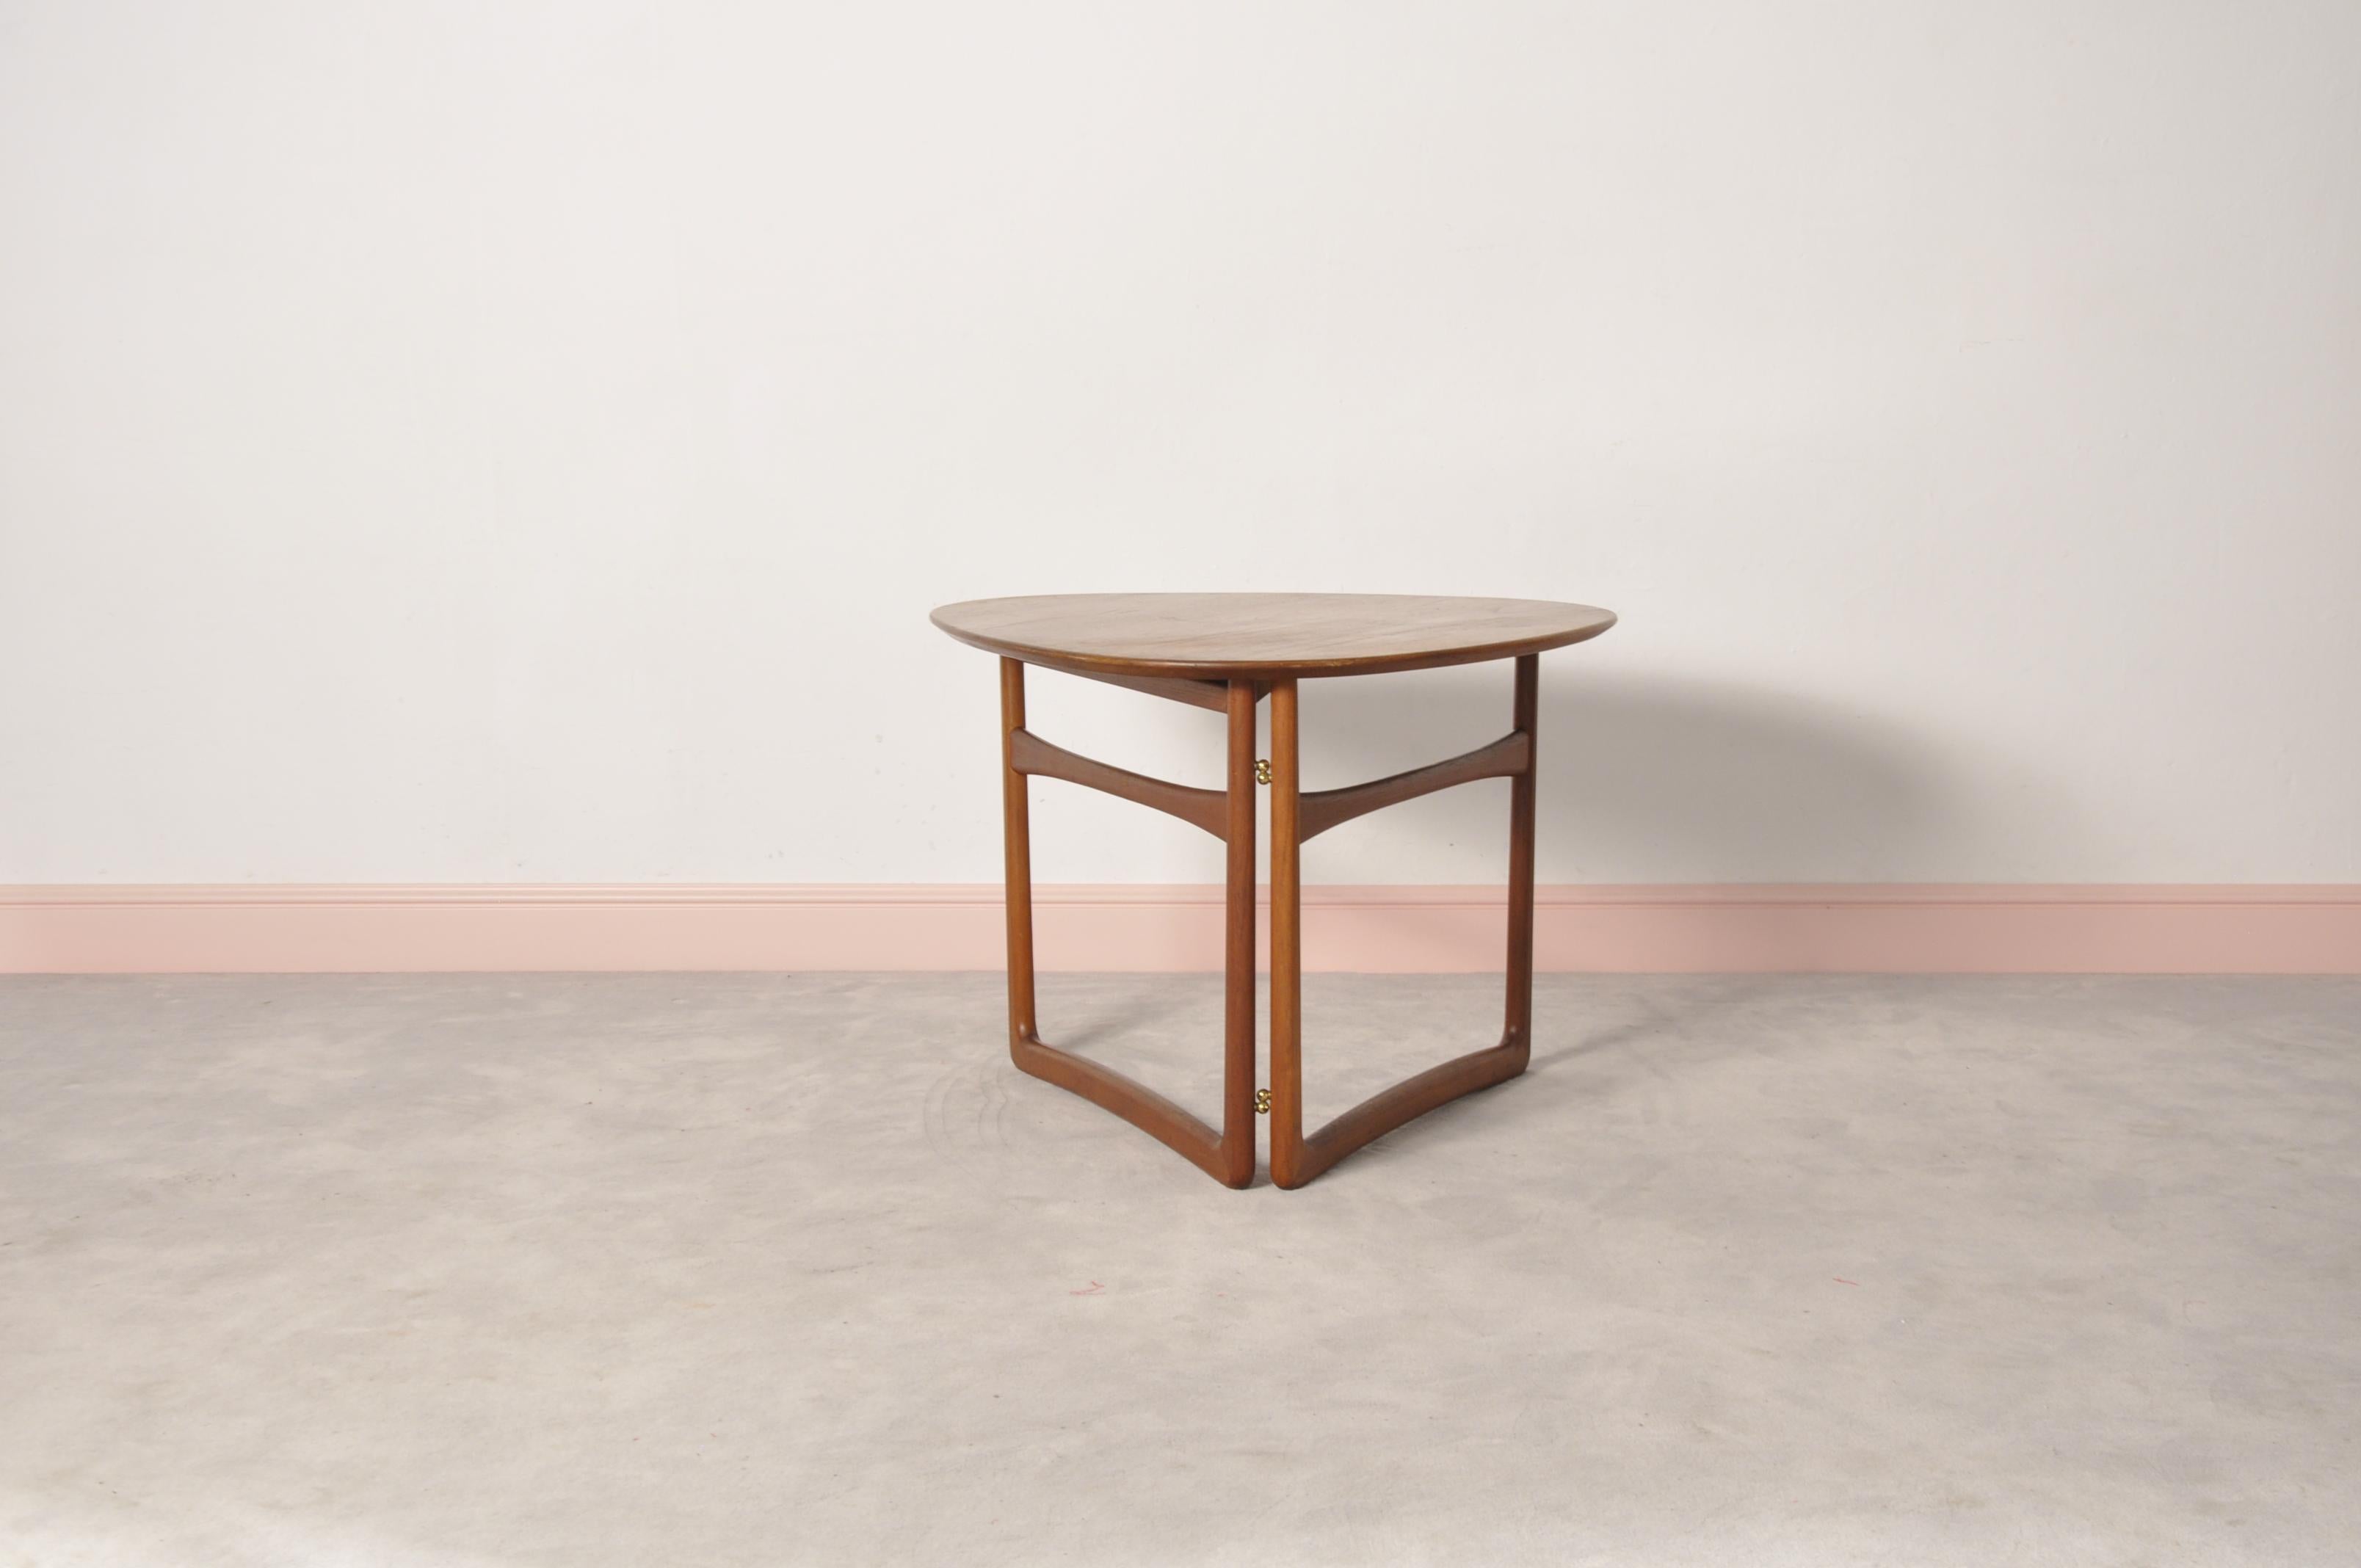 A model FD 18/57 teak folding or side table designed by Peter Hvidt and Orla Mølgaard-Nielsen for France & Daverkosen, circa 1950s. Featuring a triangular teak top with bevelled edge and rounded corners supported by a collapsible solid teak sled